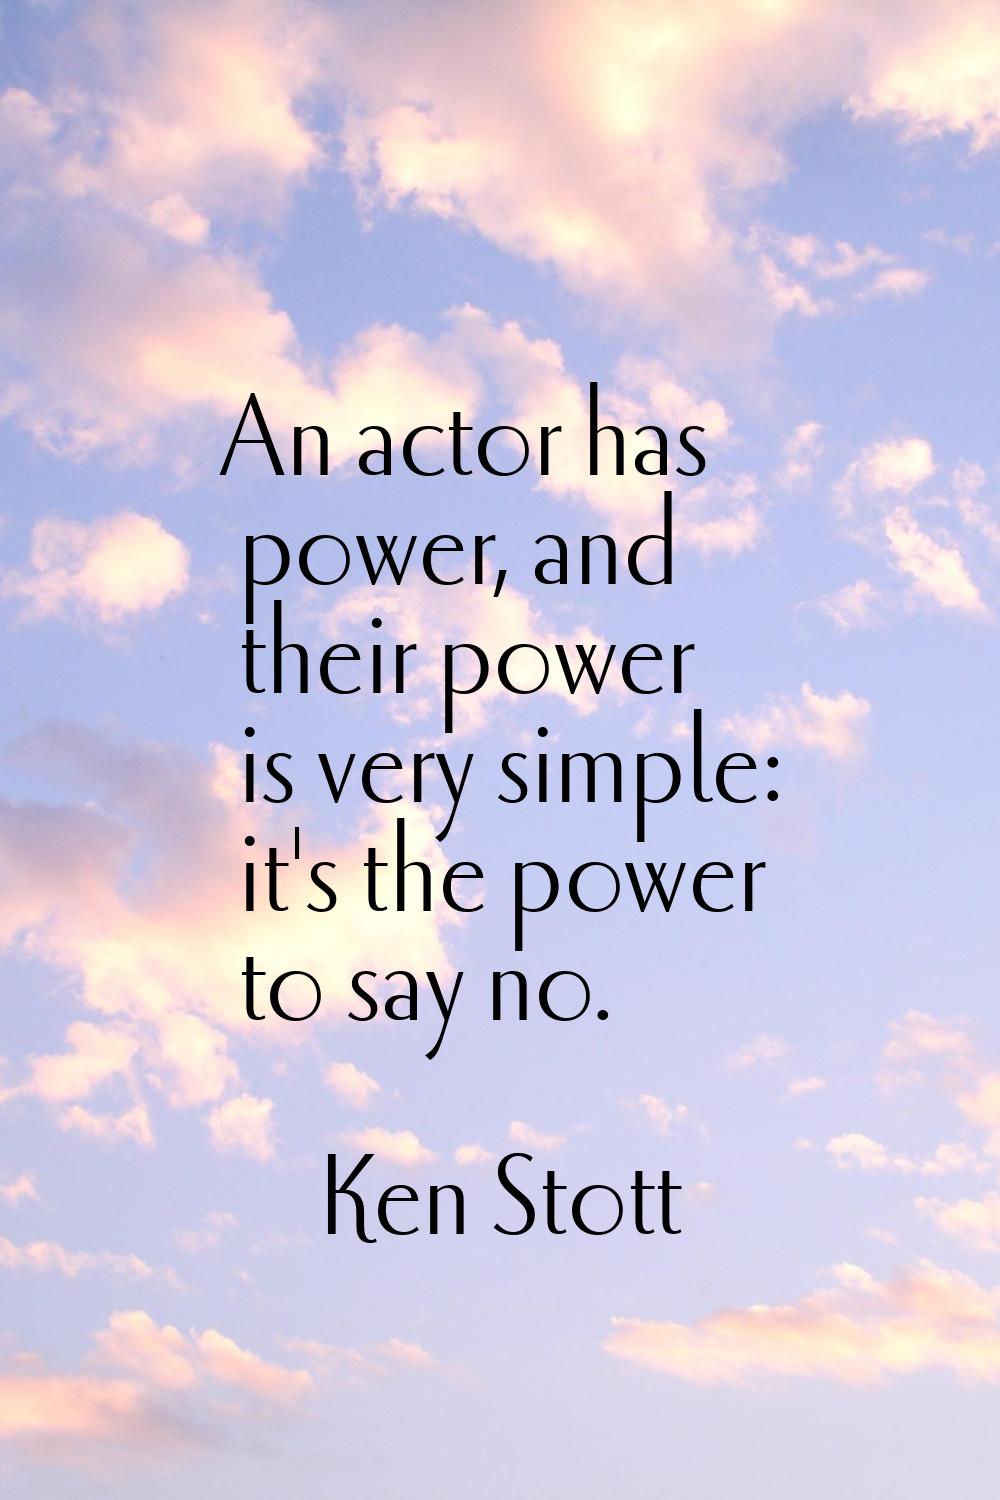 An actor has power, and their power is very simple: it's the power to say no.